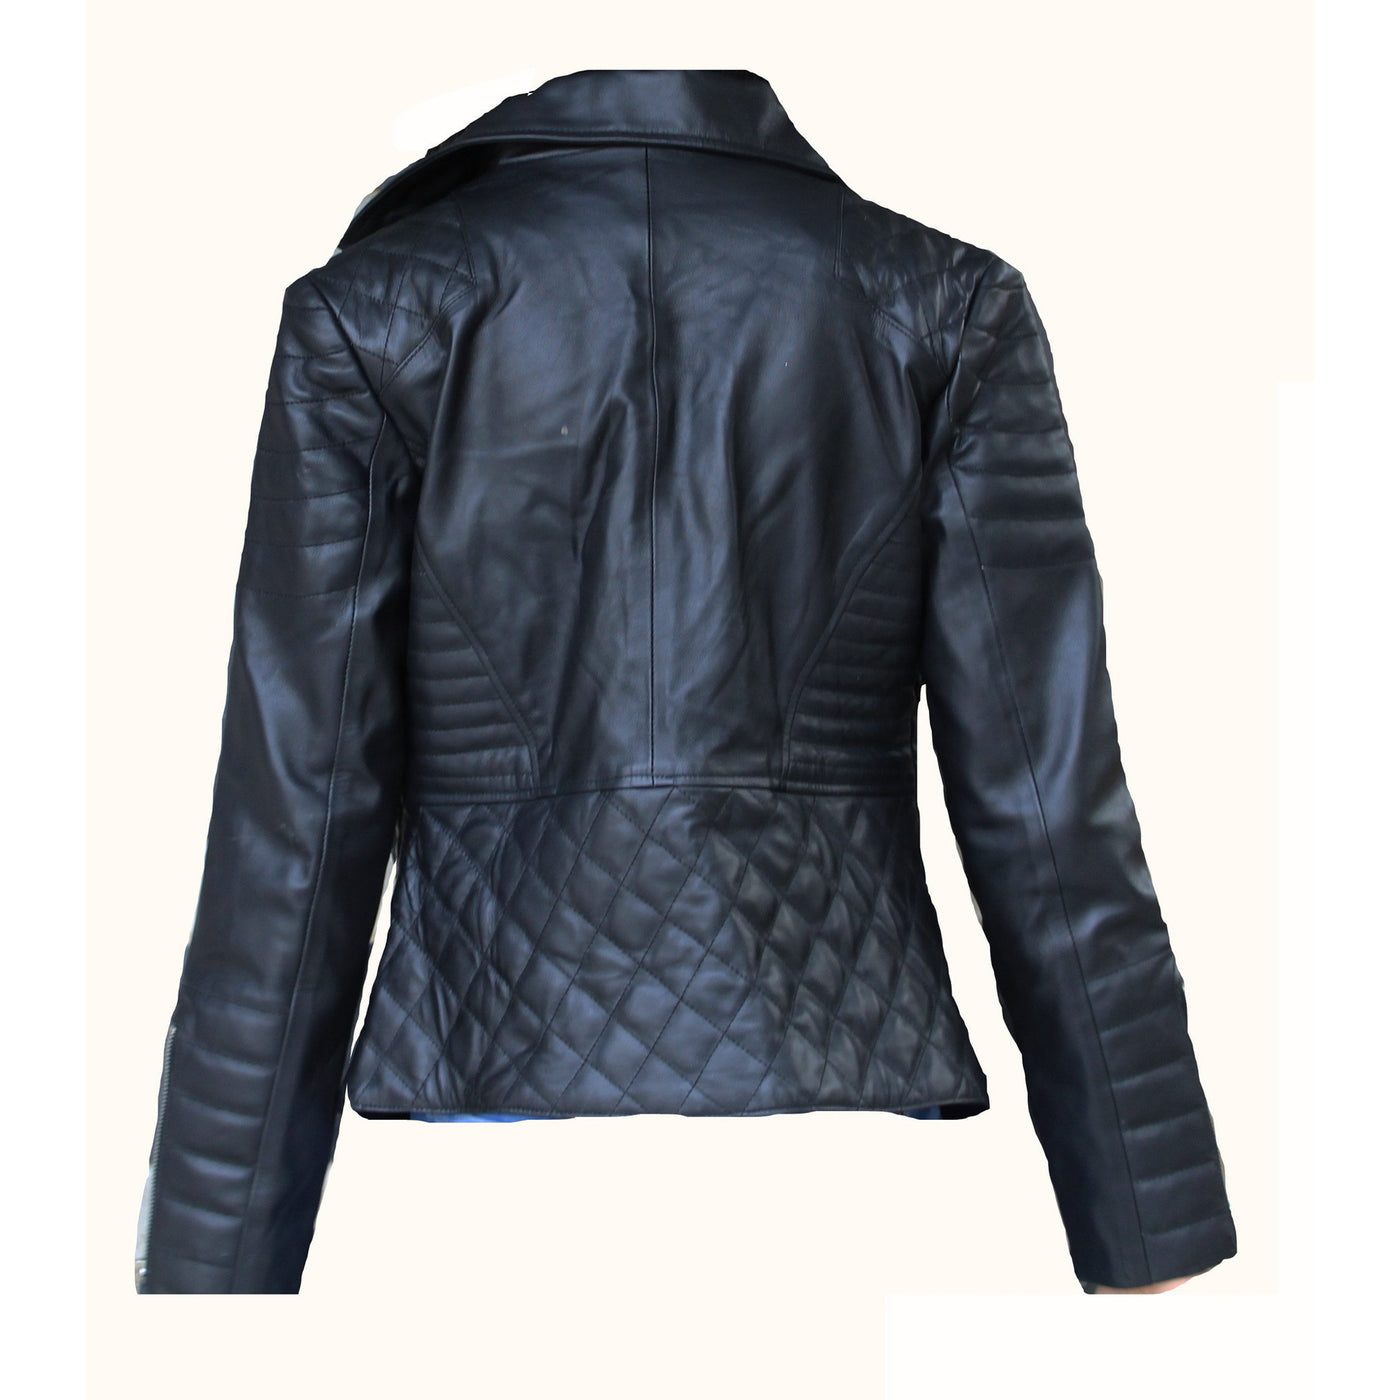 Women's jacket with quilted patterns - Lusso Leather - 2